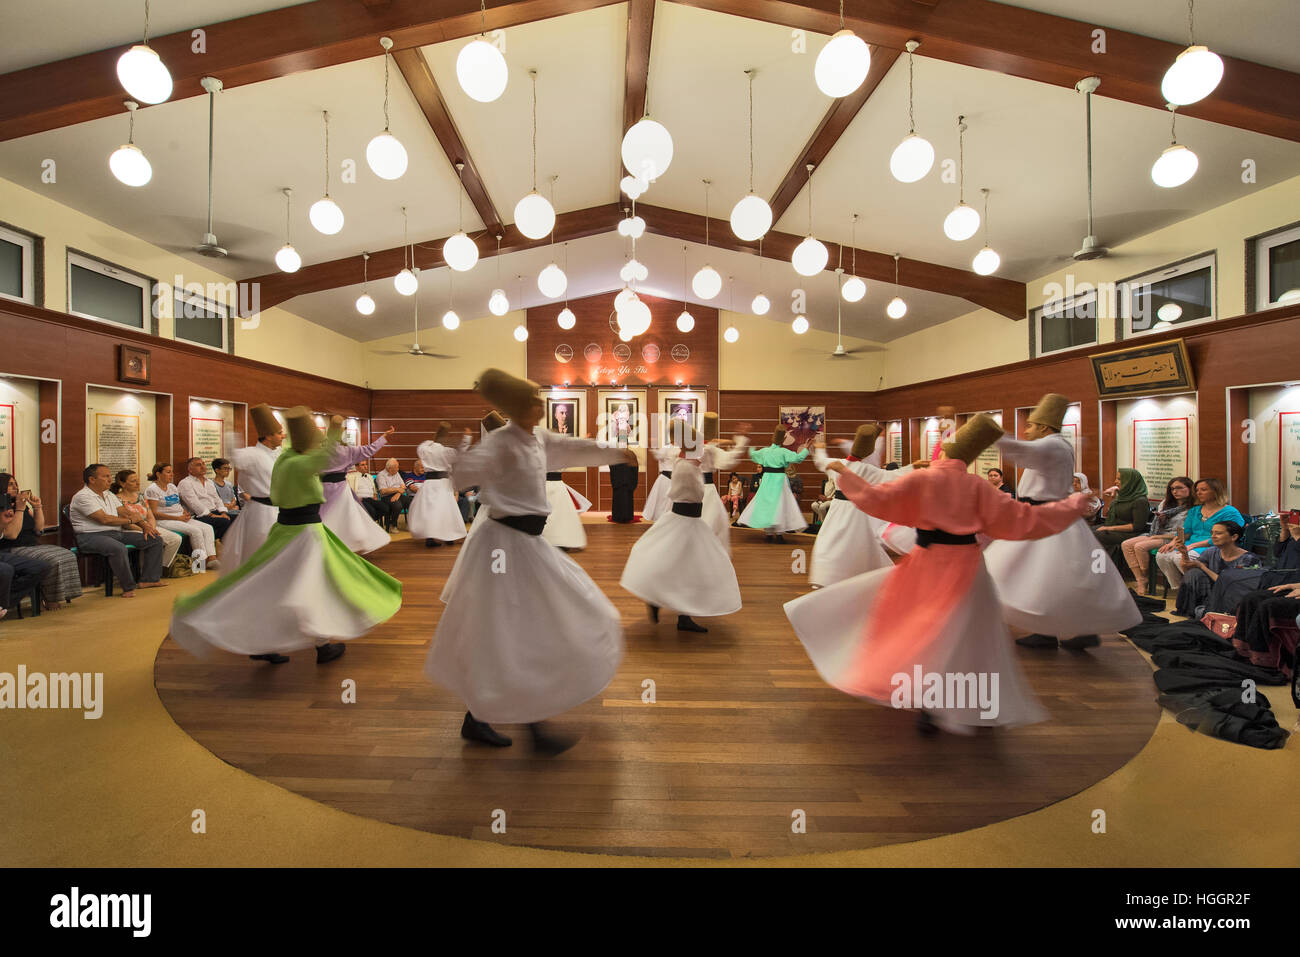 Sufi dervishes in Silivrikapi Mevlevihanesi Istanbul Turkey. Sufi whirling is a form of Sama or physically active meditation which originated among Sufis, and which is still practiced by the Sufi Dervishes of the Mevlevi order. Stock Photo